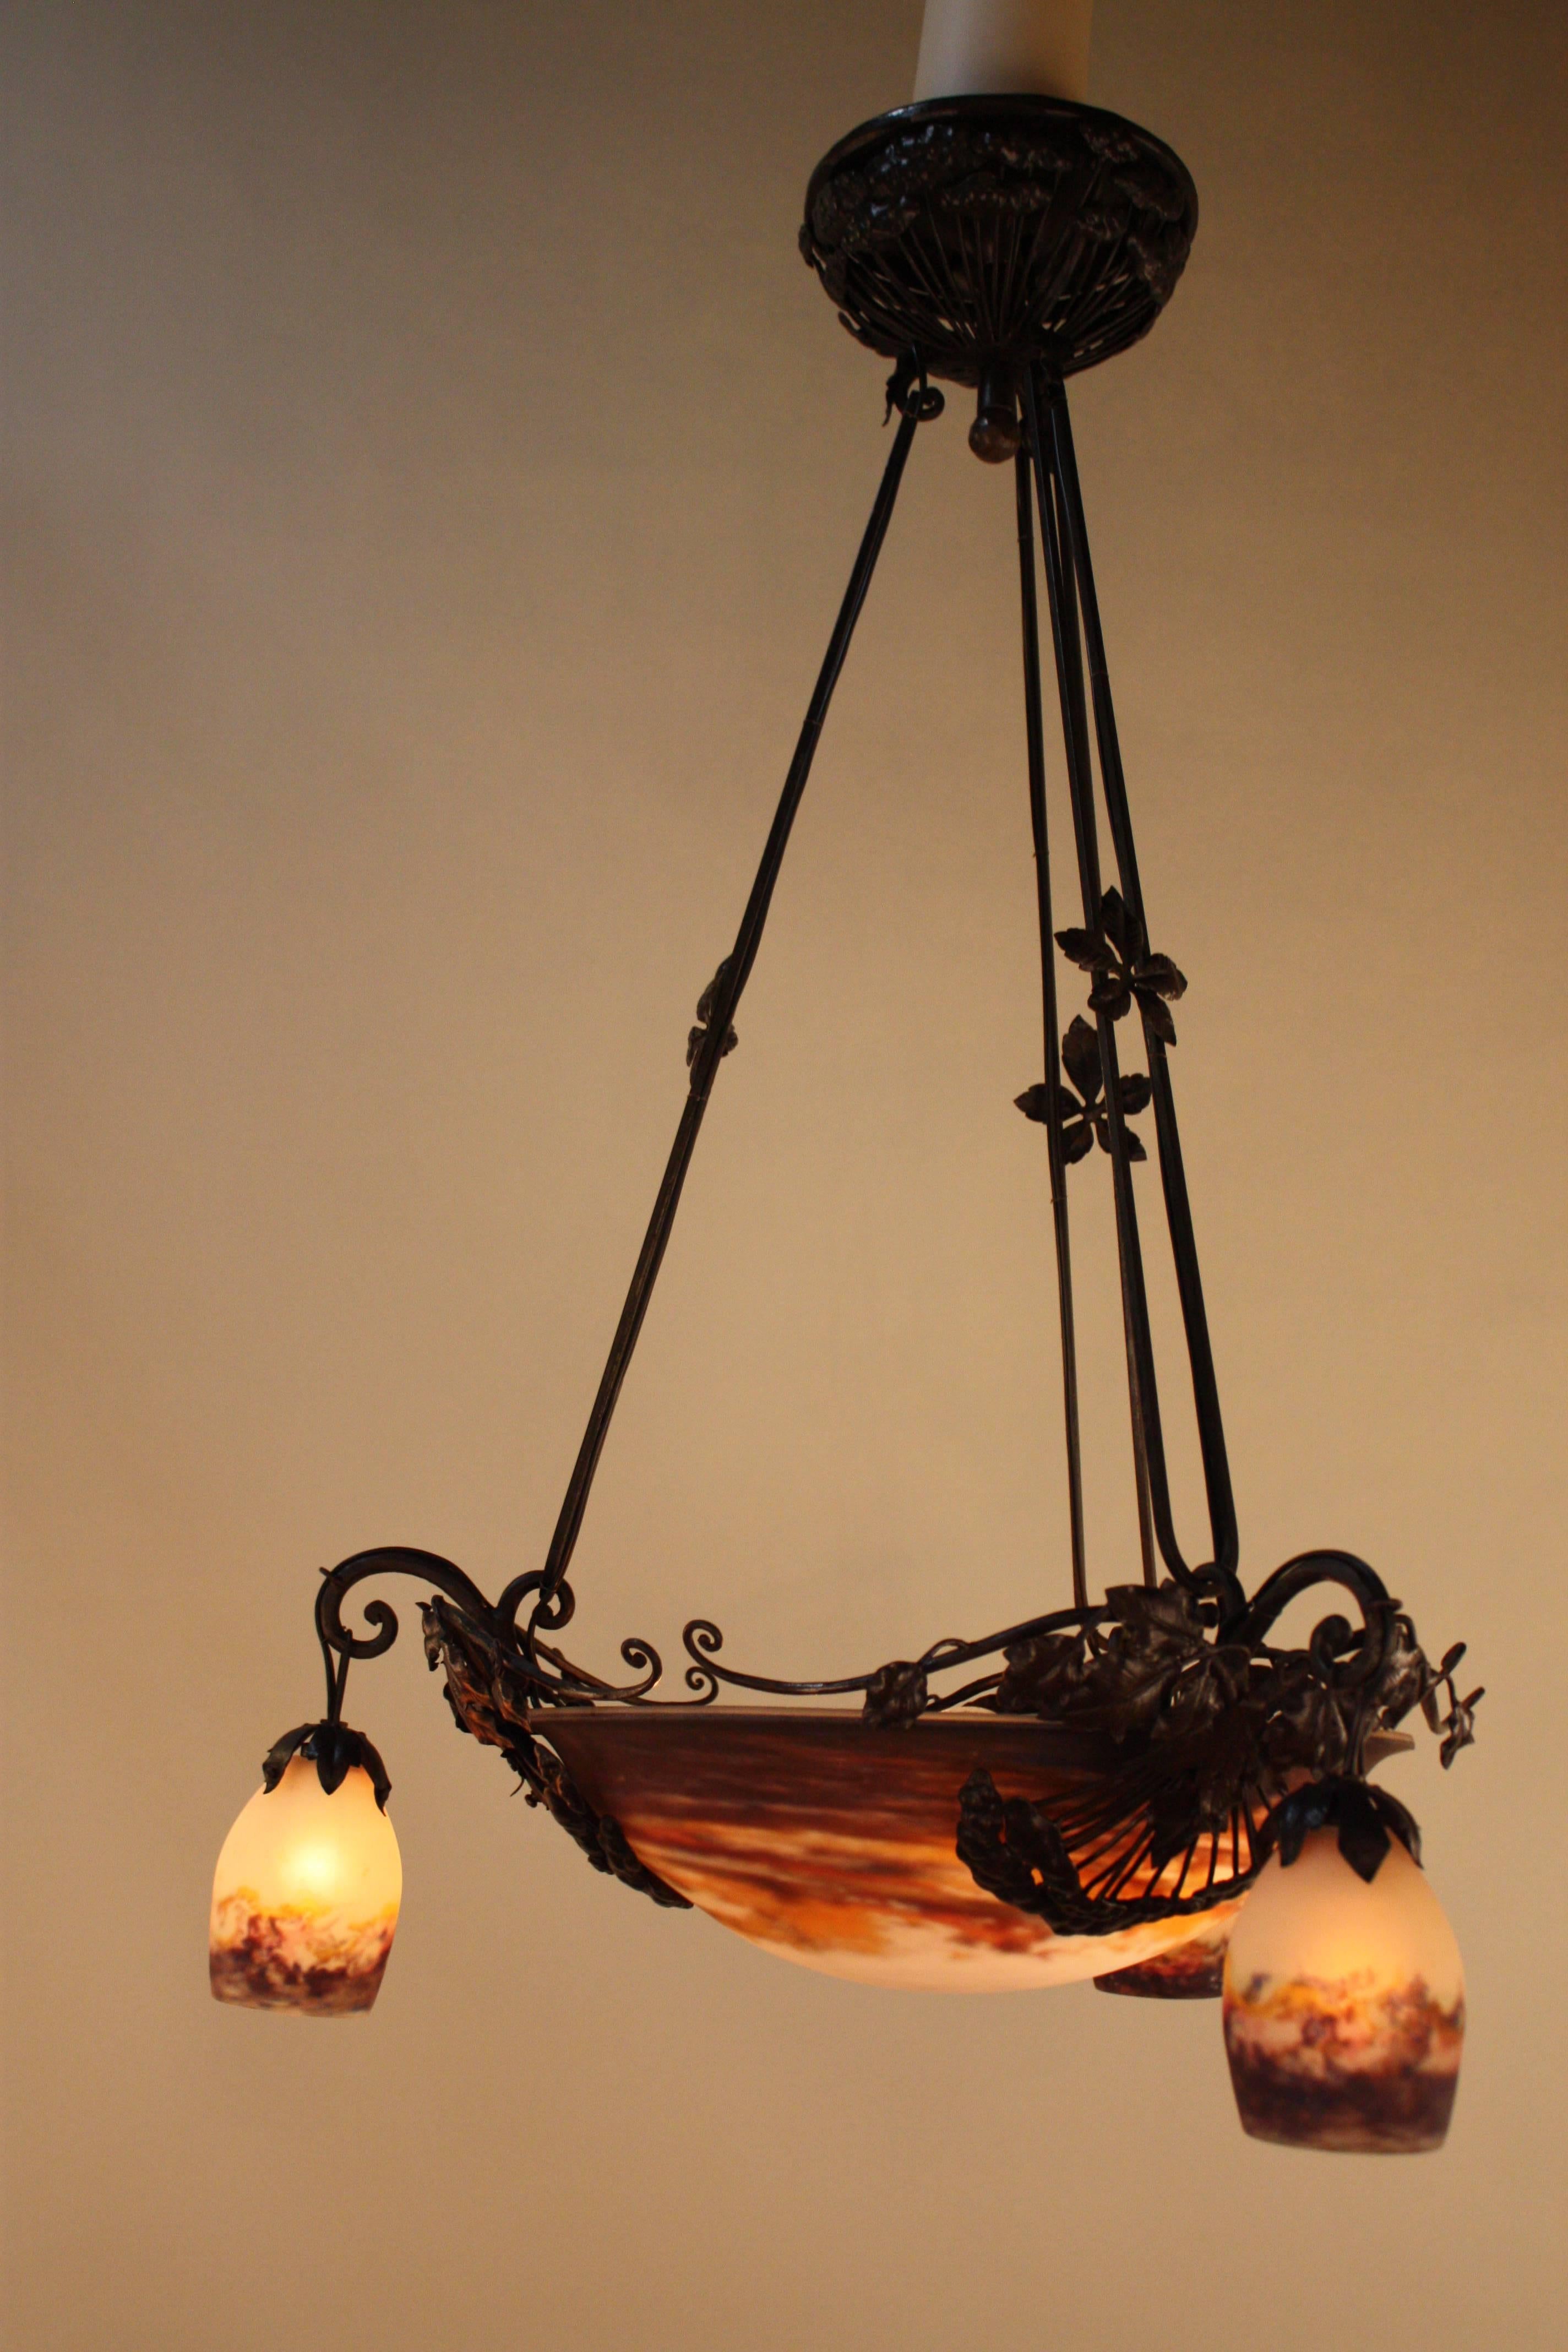 Stunning French Art Nouveau chandelier with handmade iron work and fabulous blown glass shades by Muller brothers in Luneville, France.
Total of twelve lights, 60 watt each.